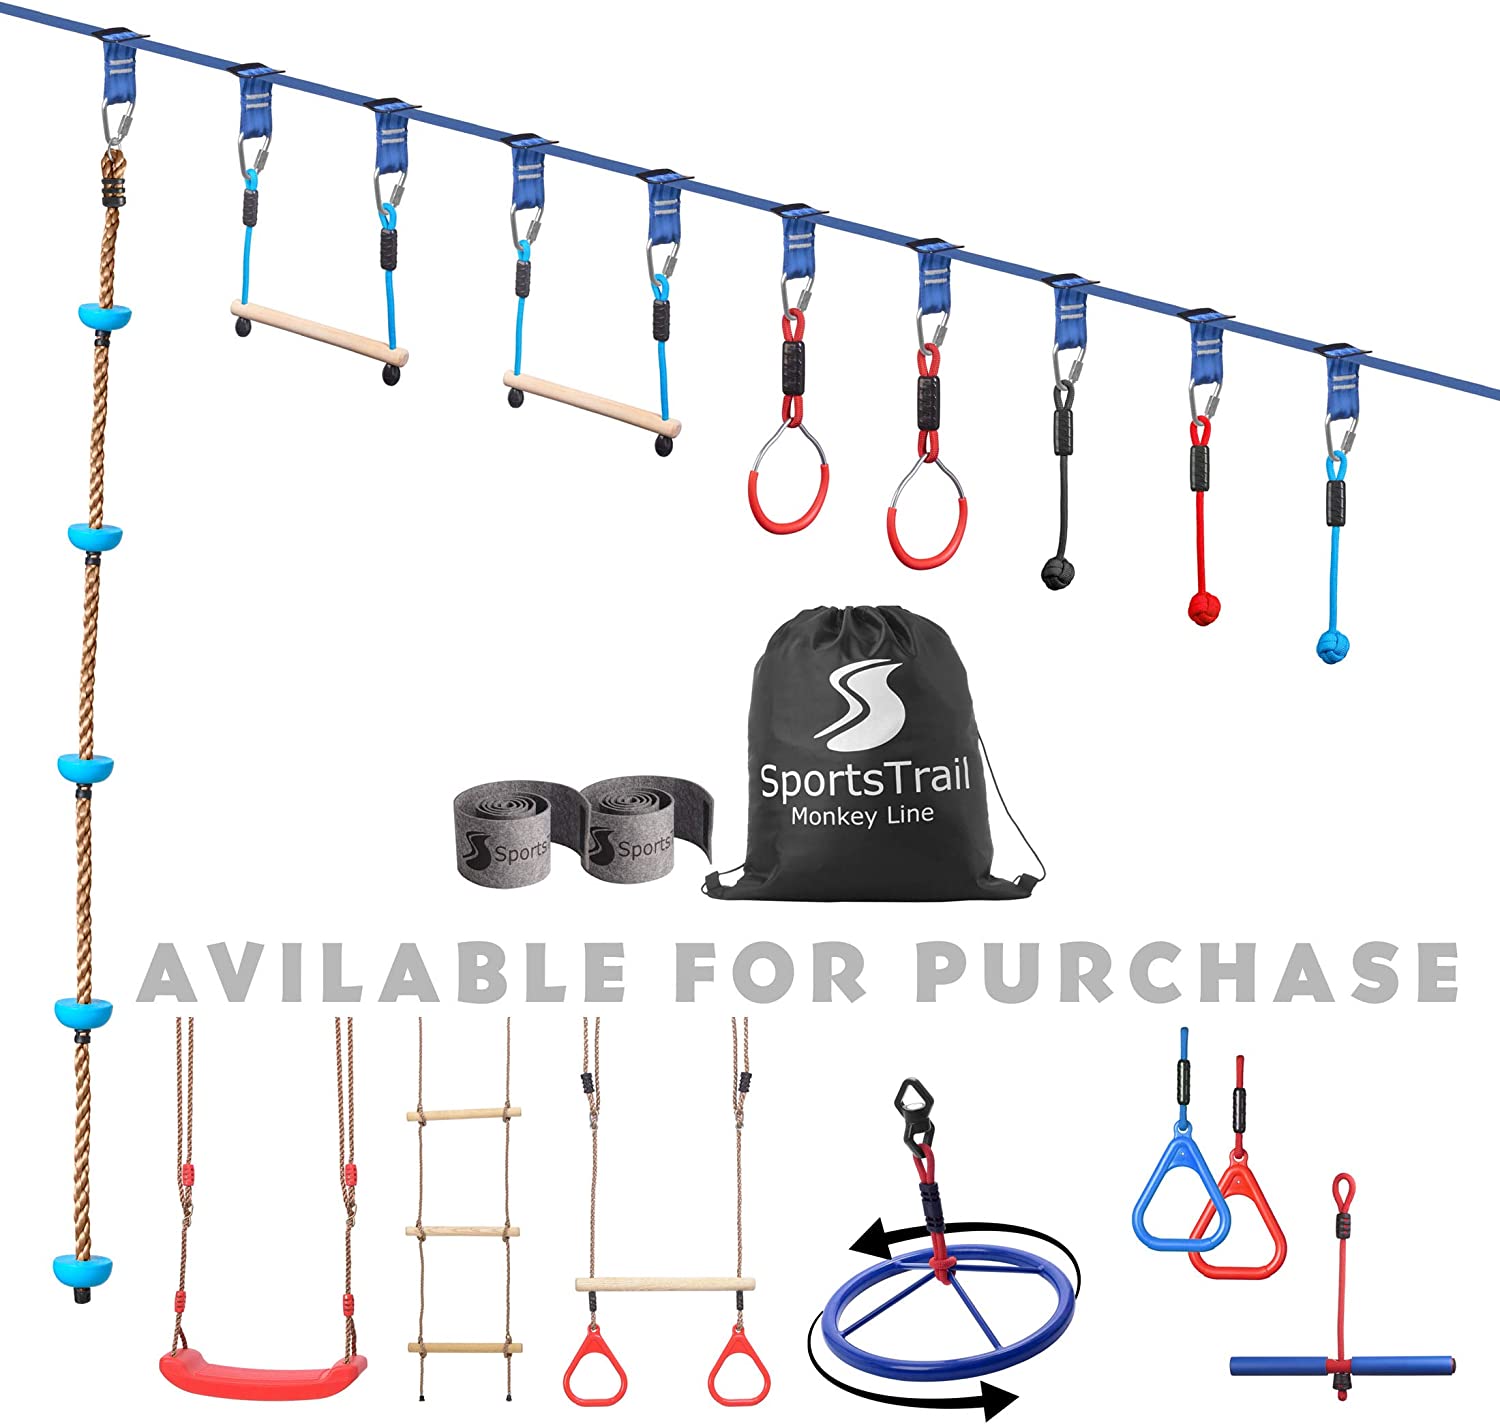 Ninja Warrior Training Equipment Accessories Include Swing Ladder Childrens Windproof Ninja Obstacle Course Ninja Slack Rope with 14 Obstacles 